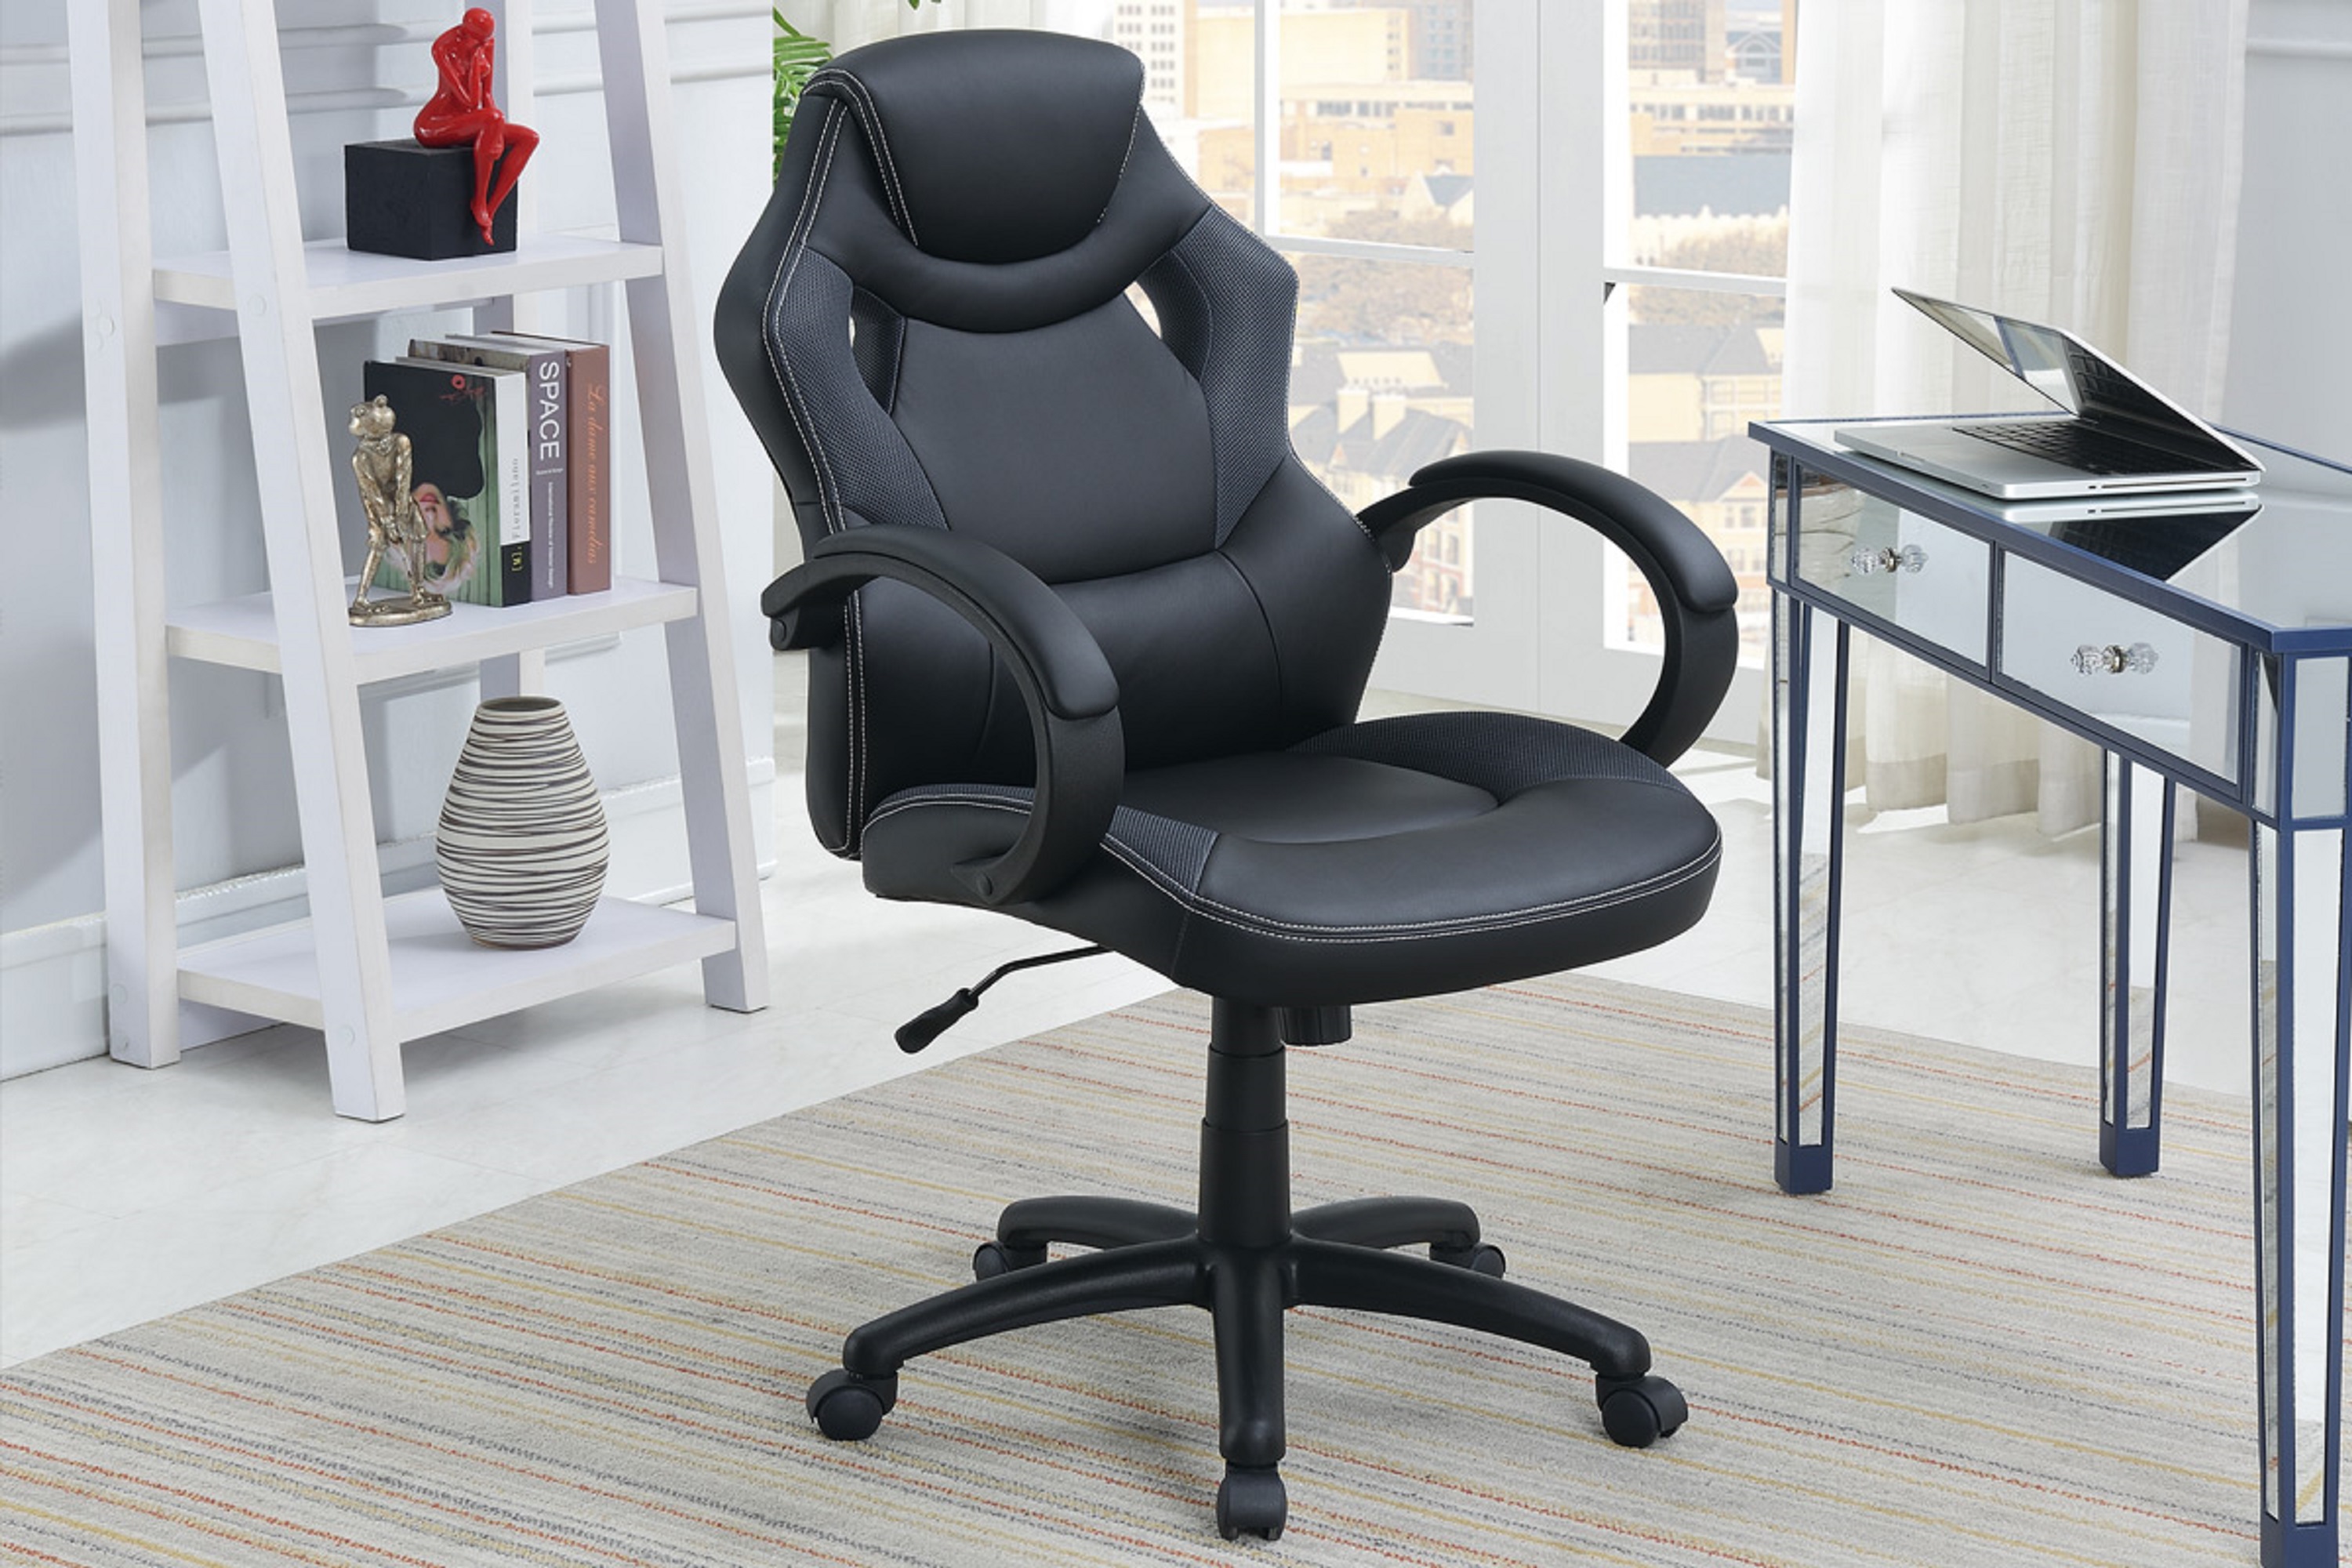 Office Chair Upholstered 1pc Cushioned Comfort Chair Relax Gaming Office Work Black Color-Boyel Living